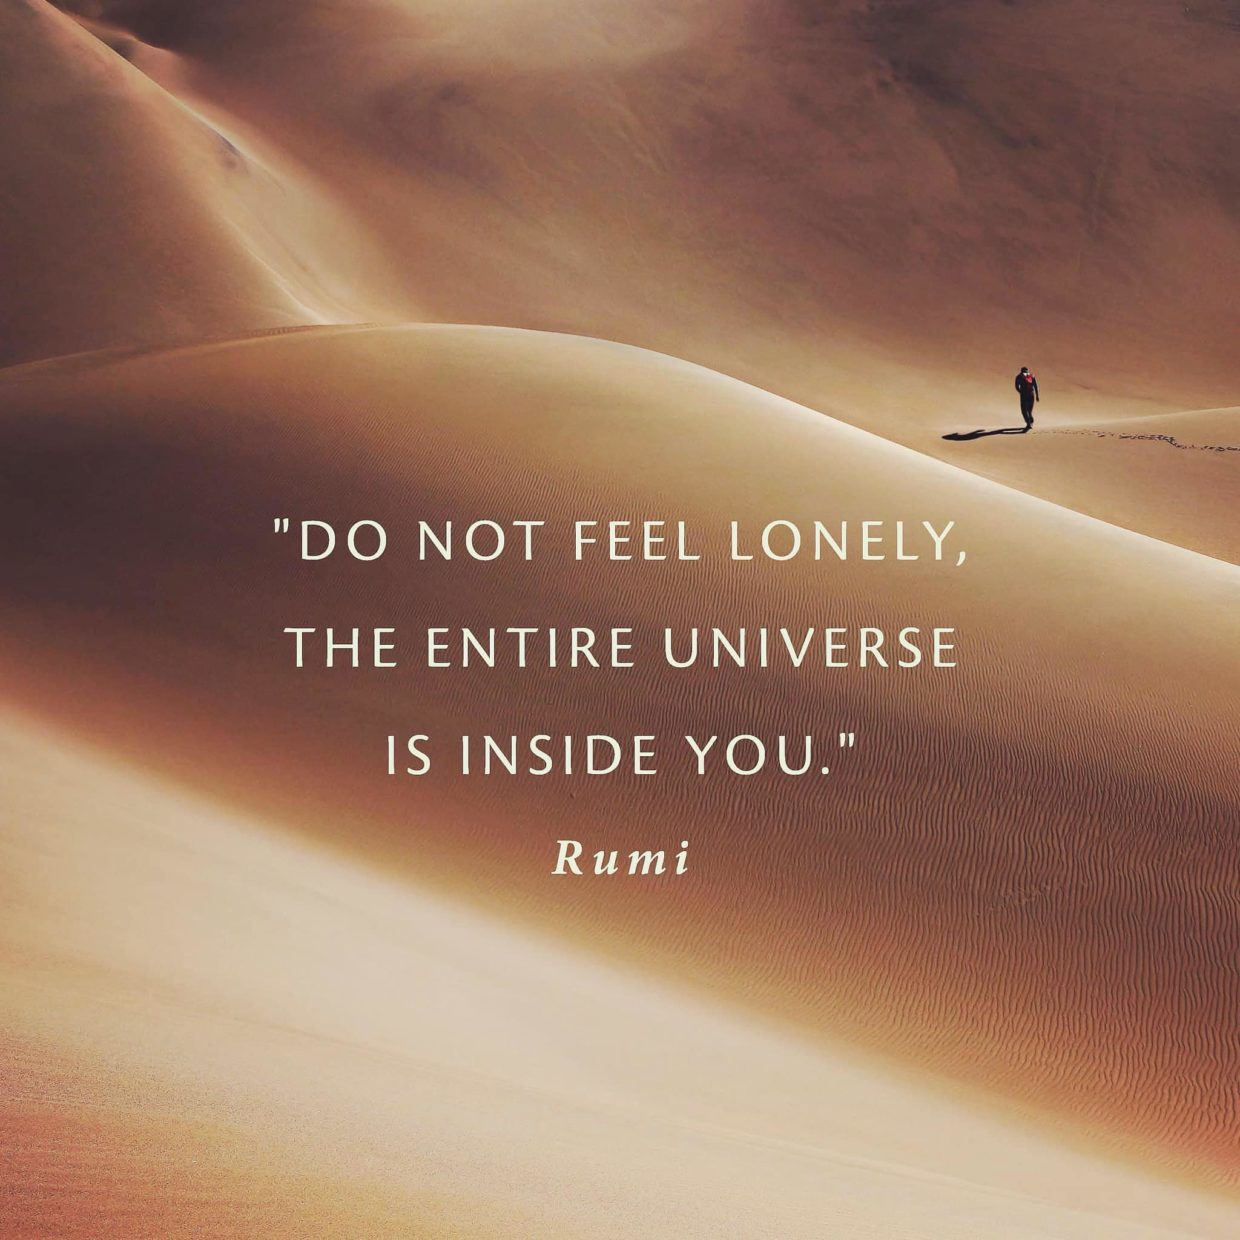 The entire universe is inside you - Rumi